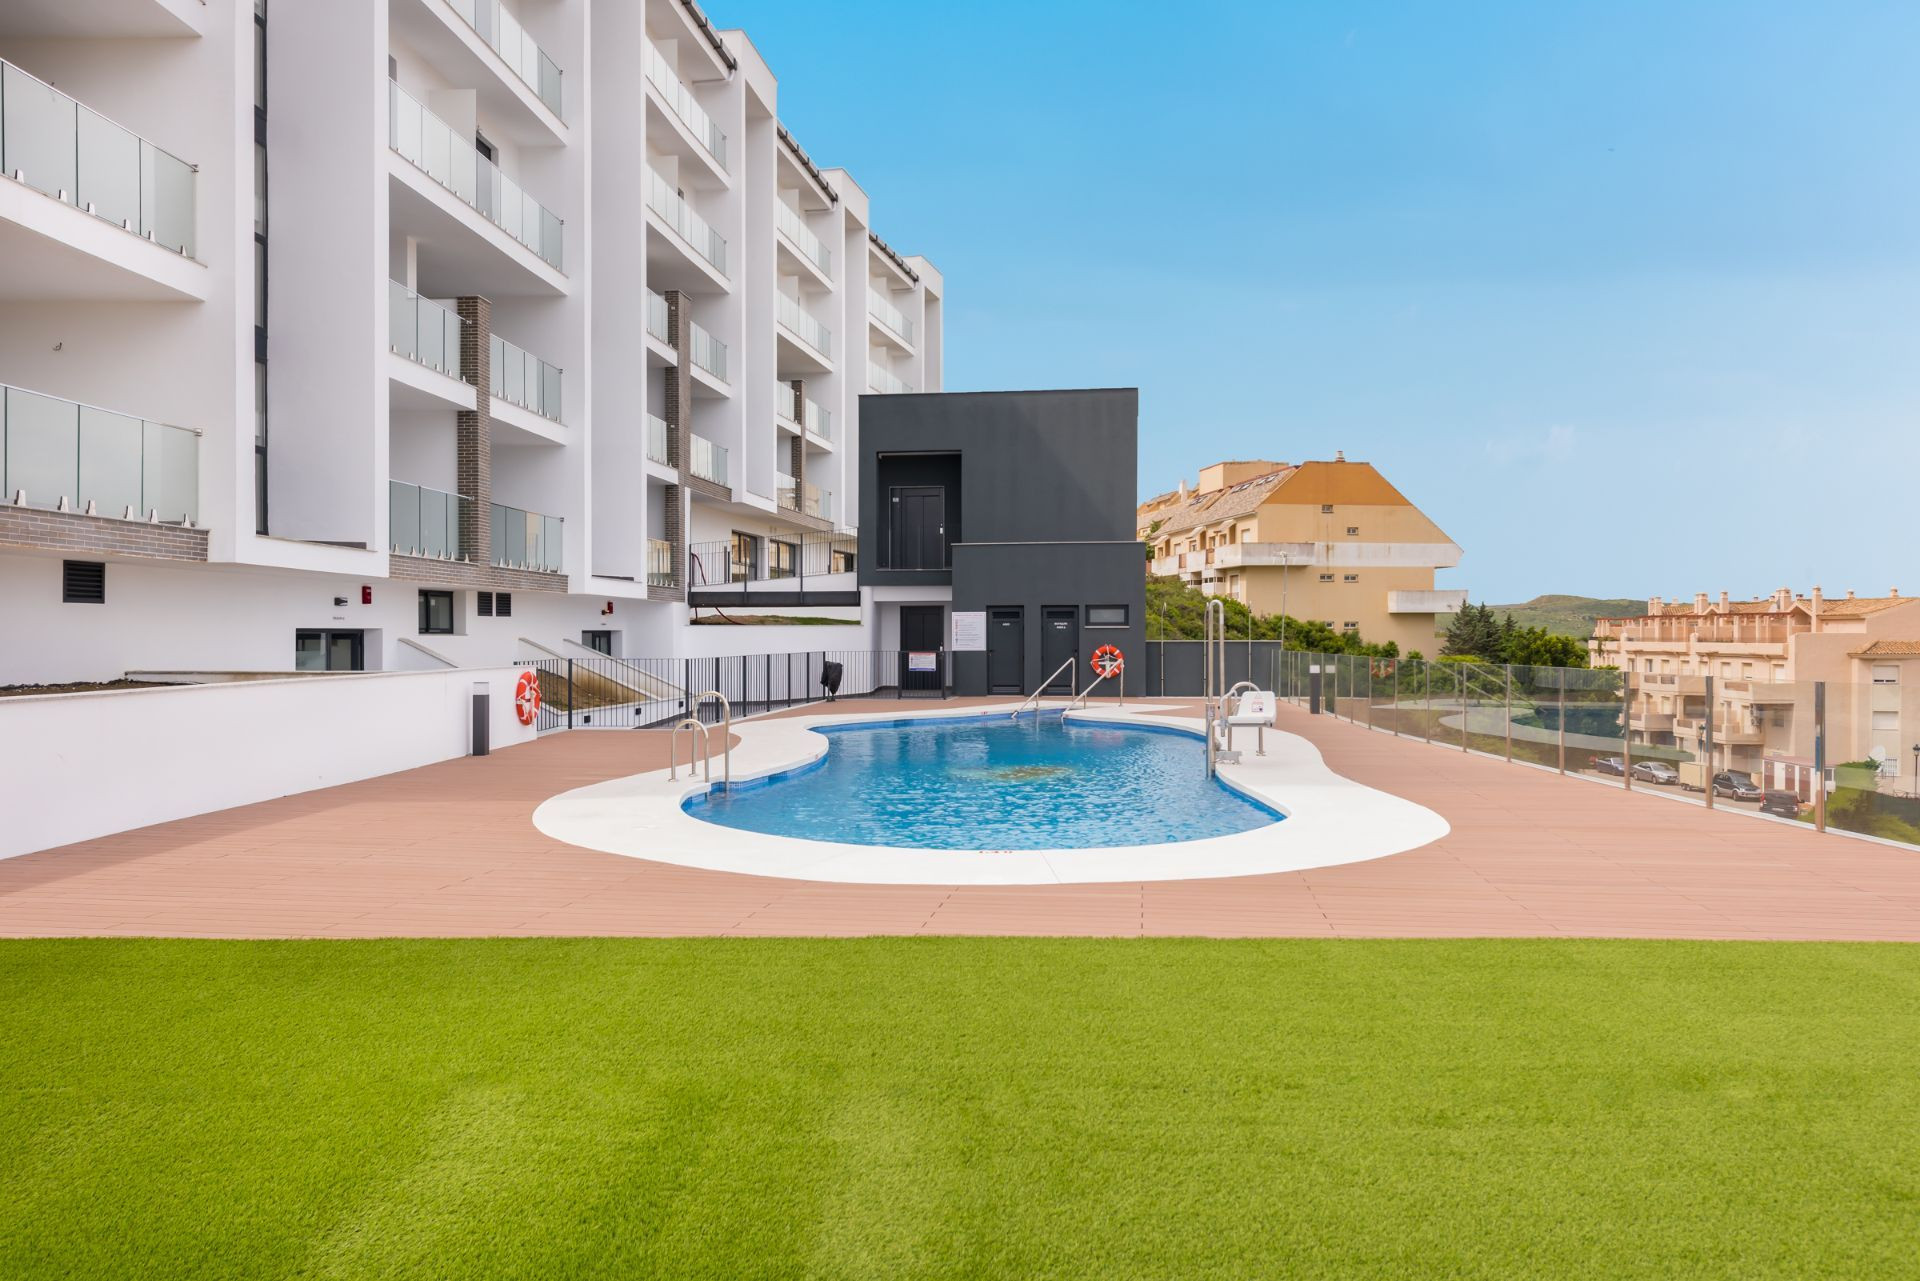 Modern apartments for sale close to the beach and the Harbour, La Duquesa